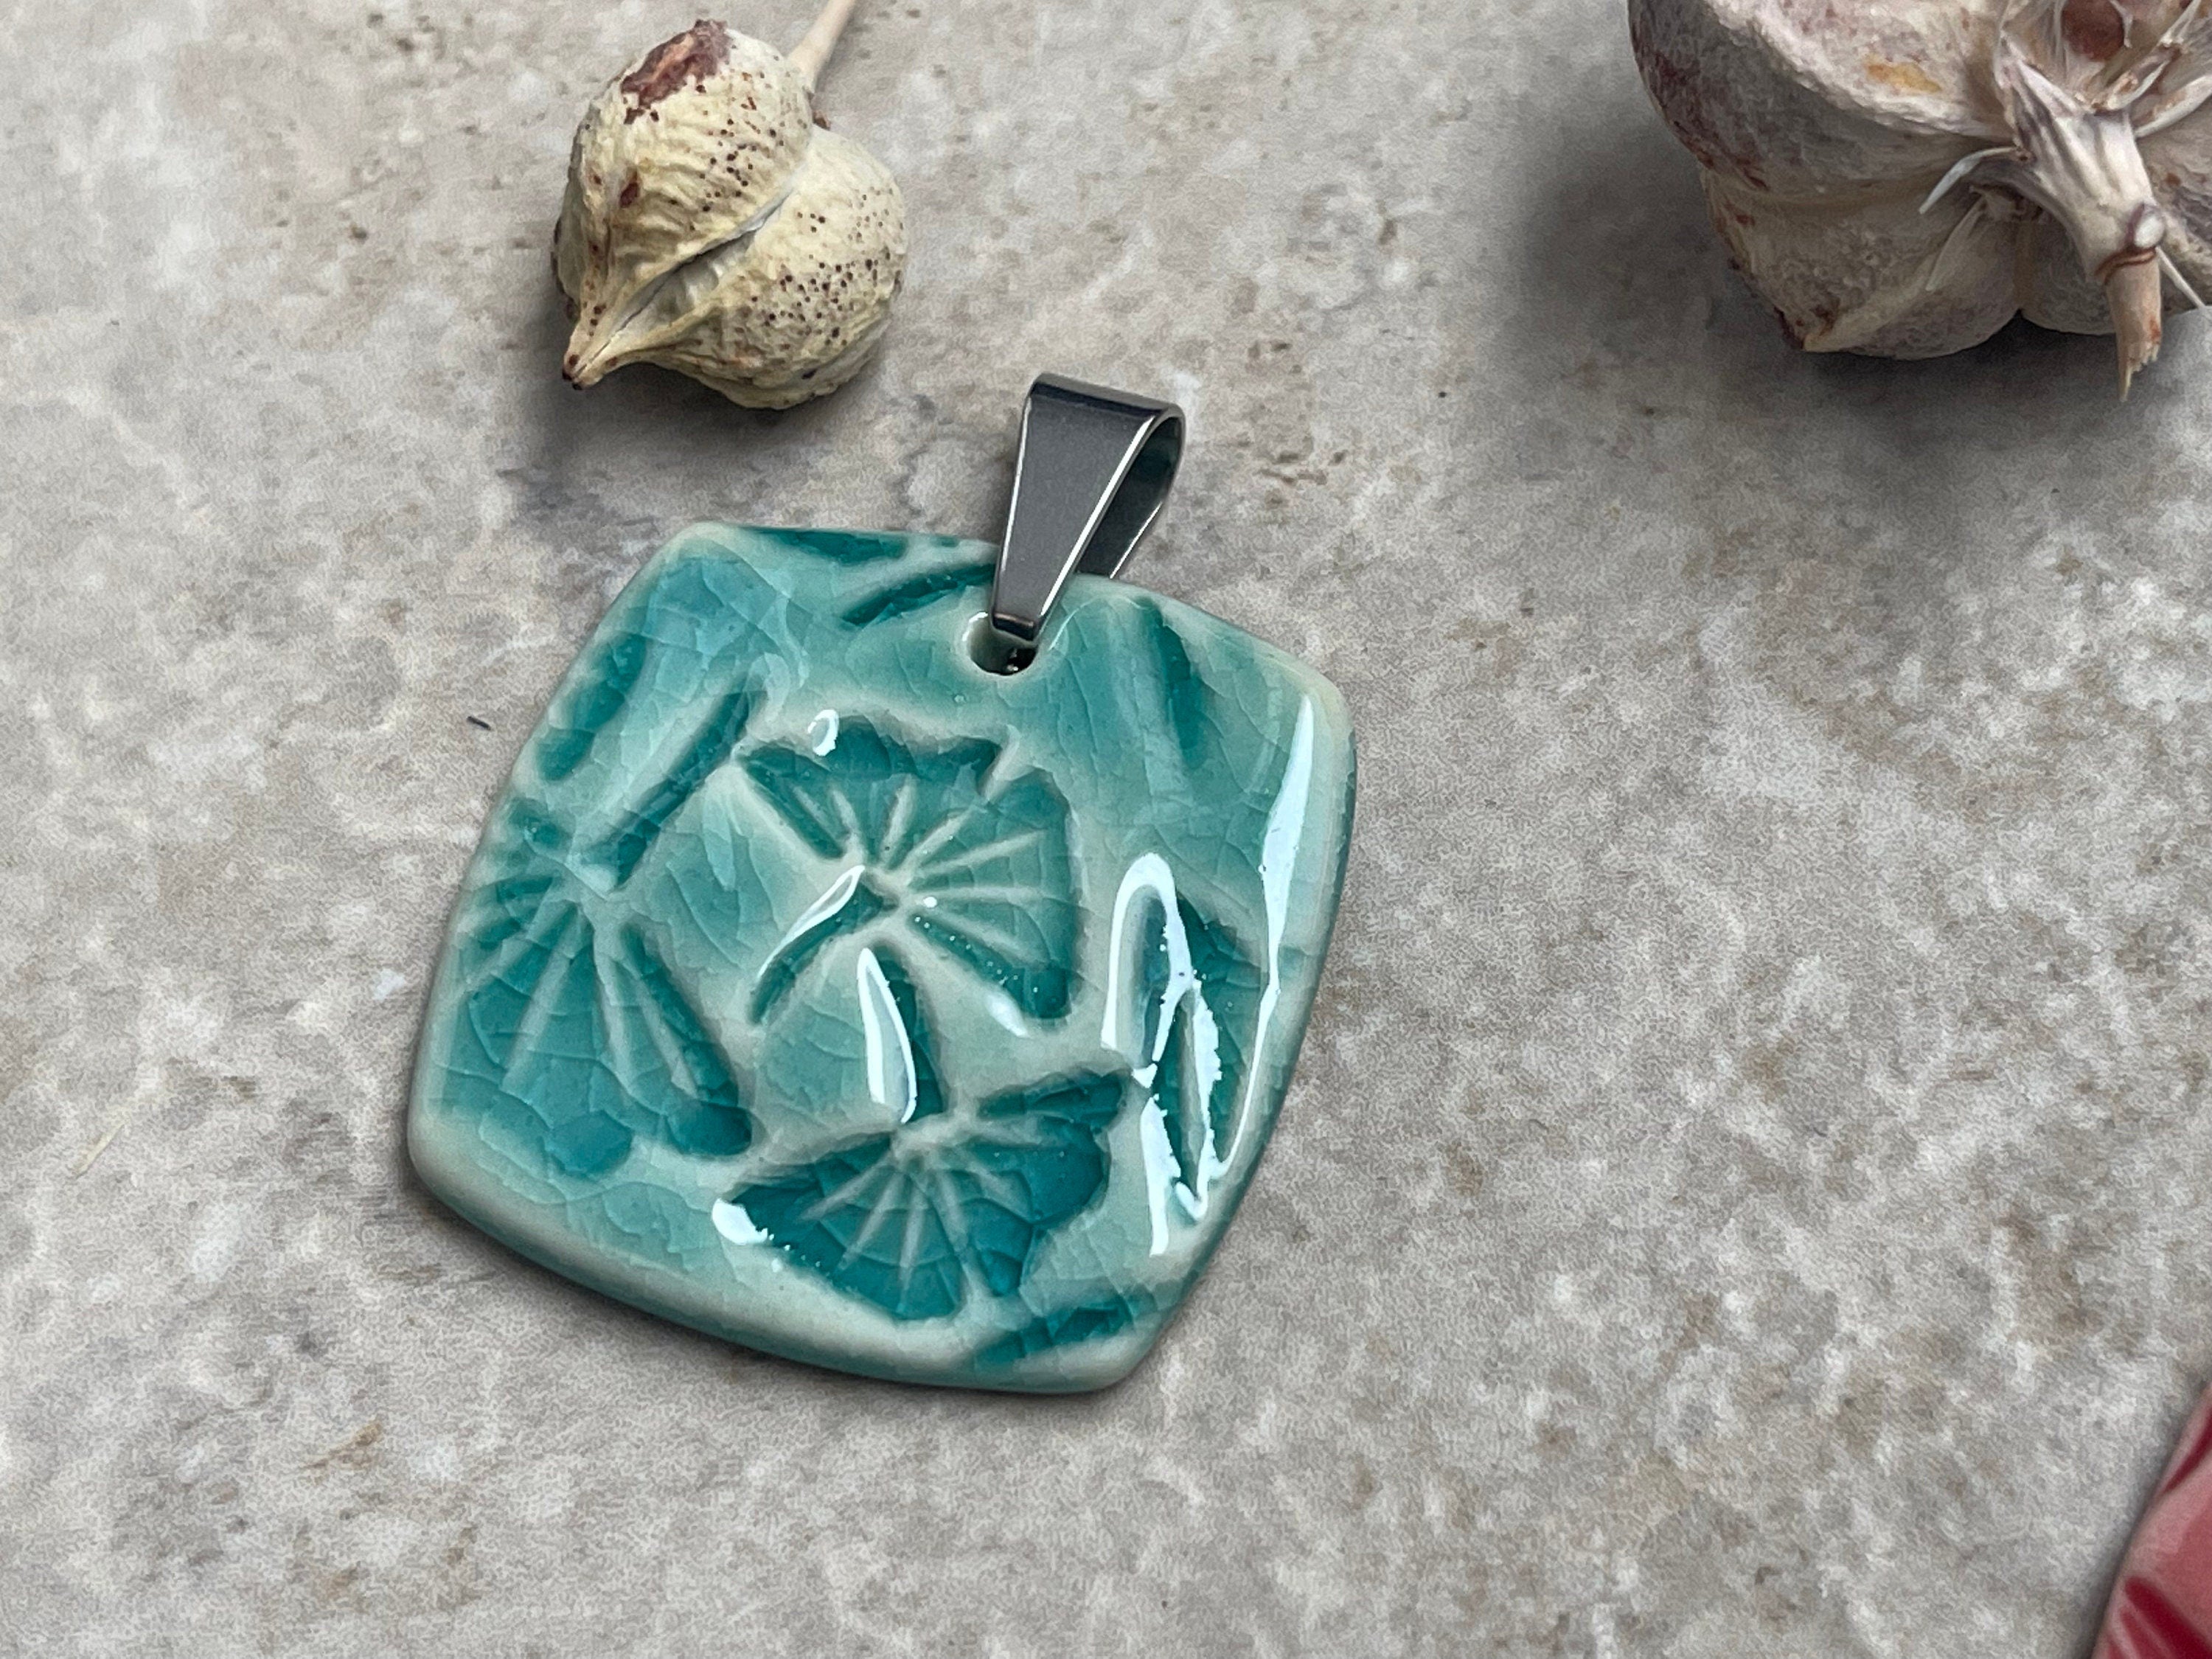 Turquoise Ginkgo Bead, Ginkgo Pendant, Plant Lover, Bead Set, Ginkgo Jewelry, Porcelain Ceramic Pendant, Jewelry Making Components